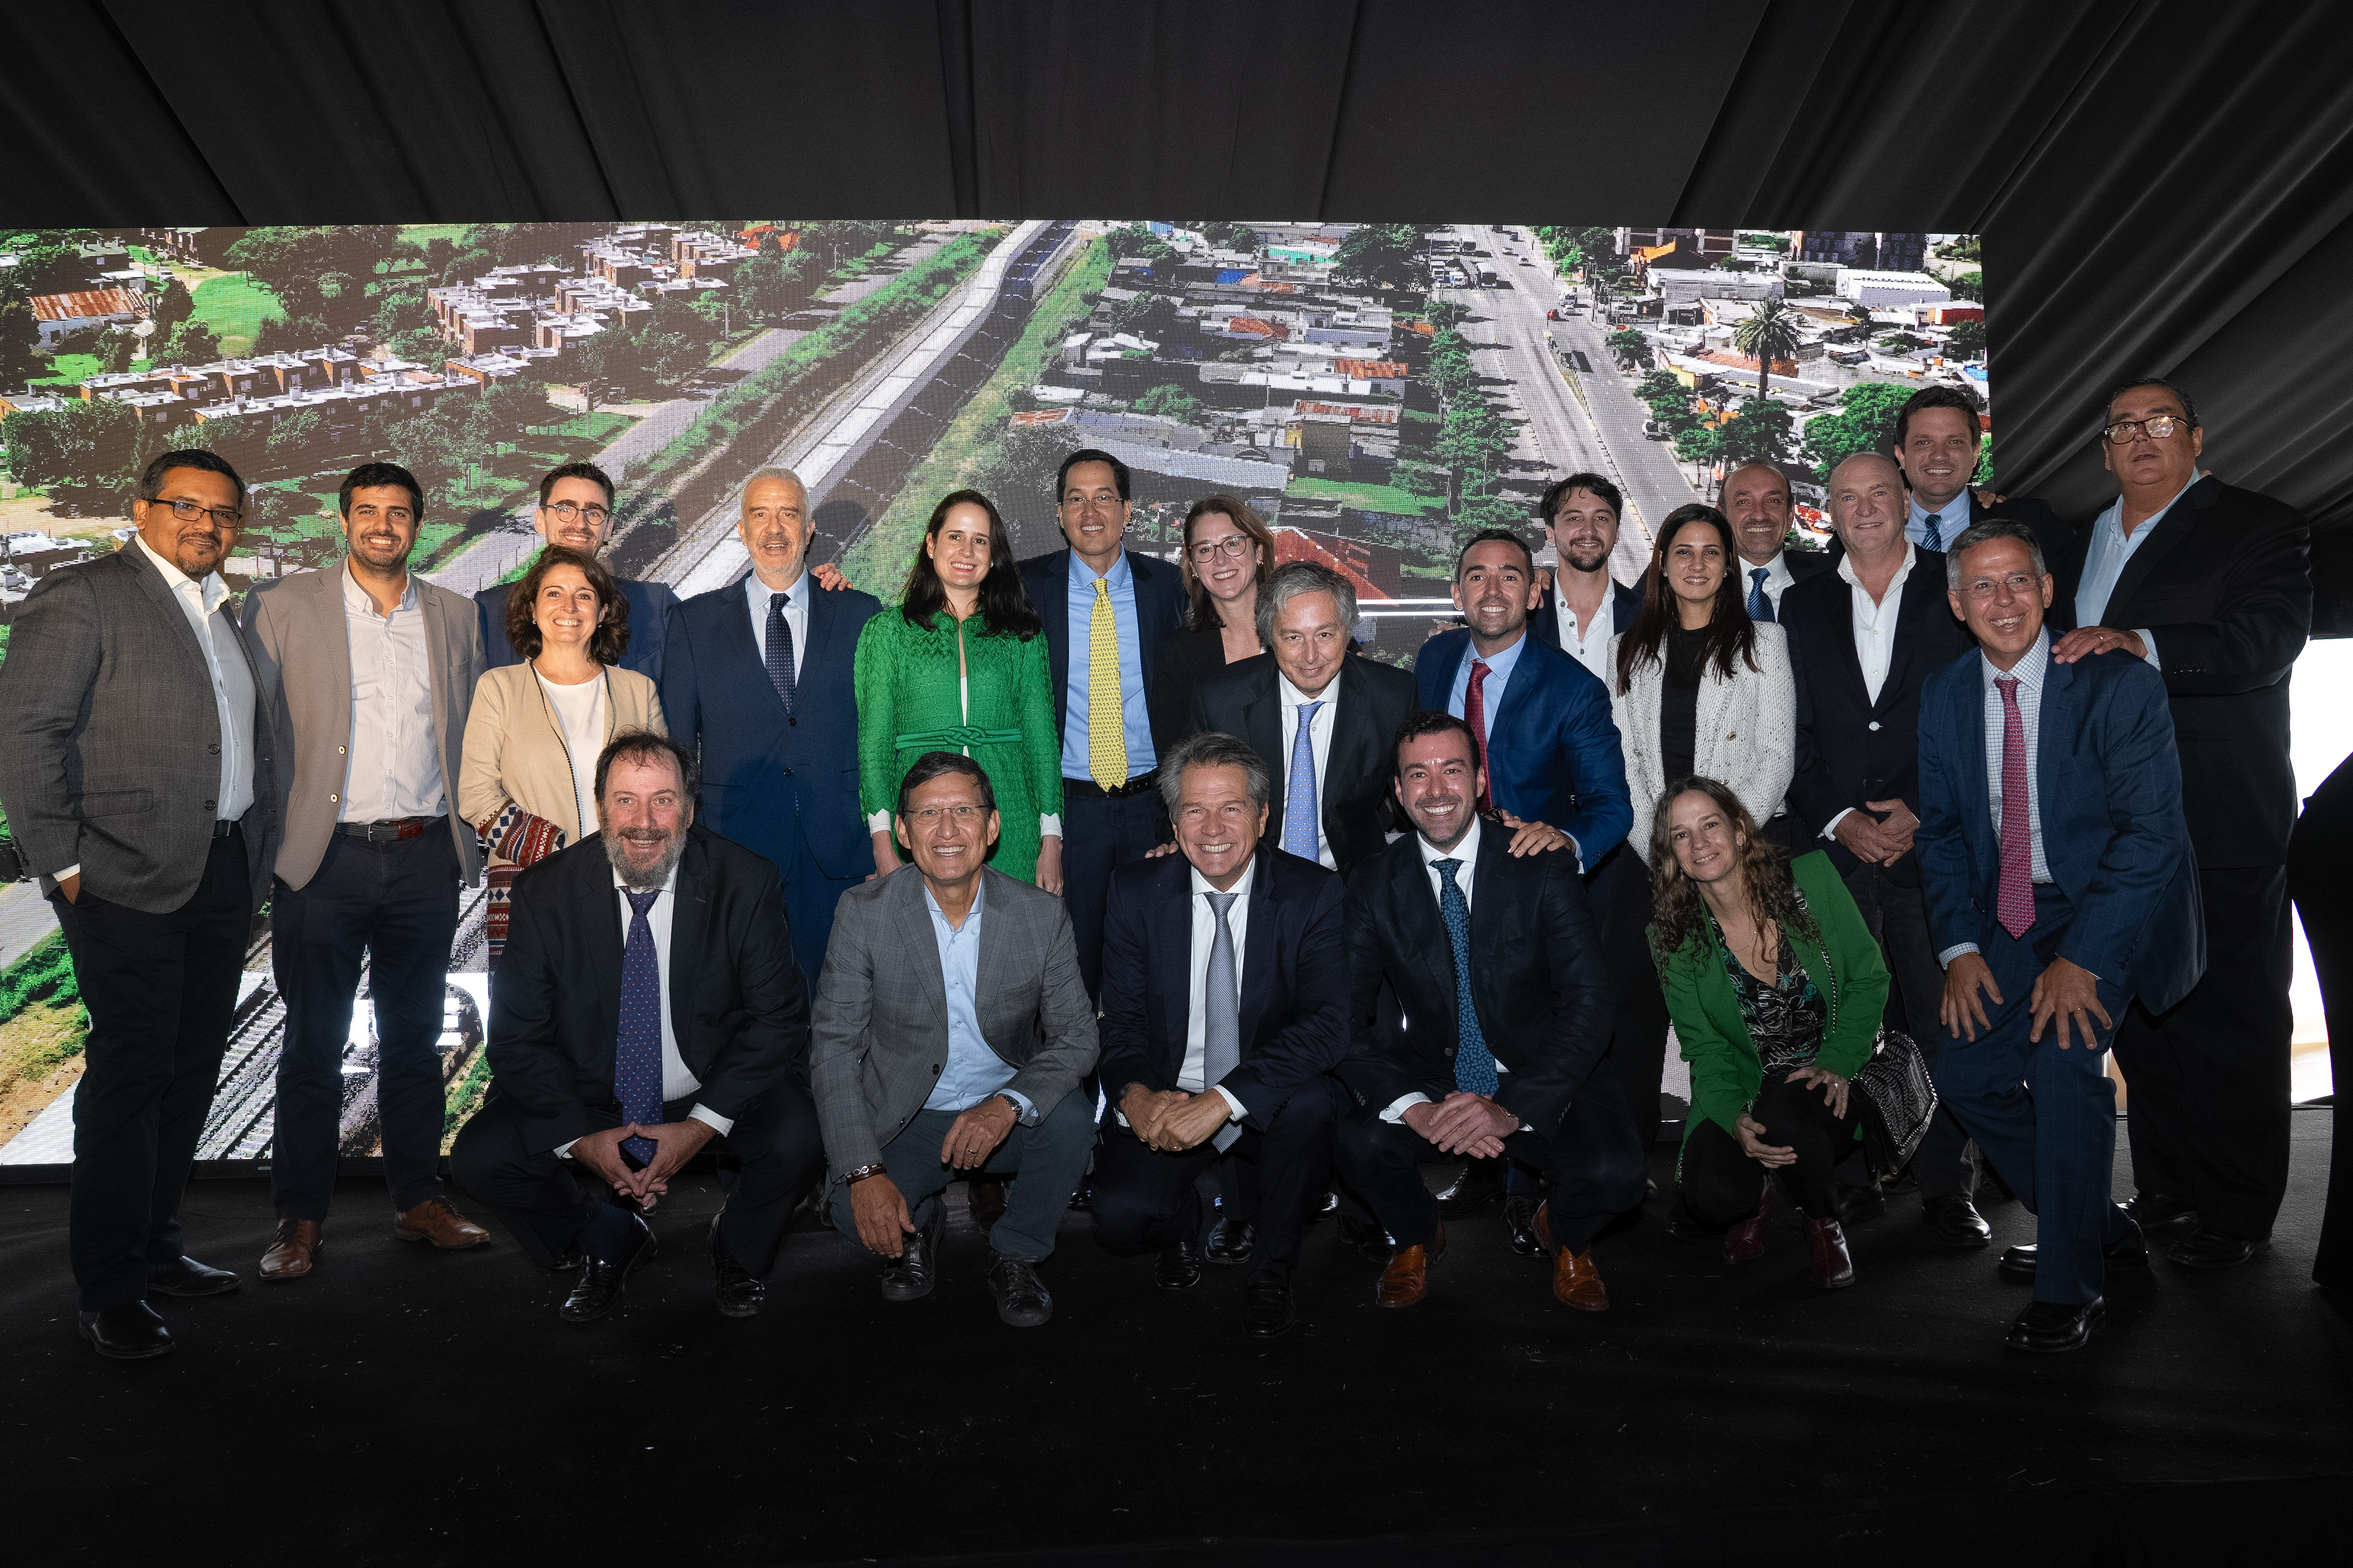 CAF celebrates inauguration of the Central Railroad Project in Uruguay